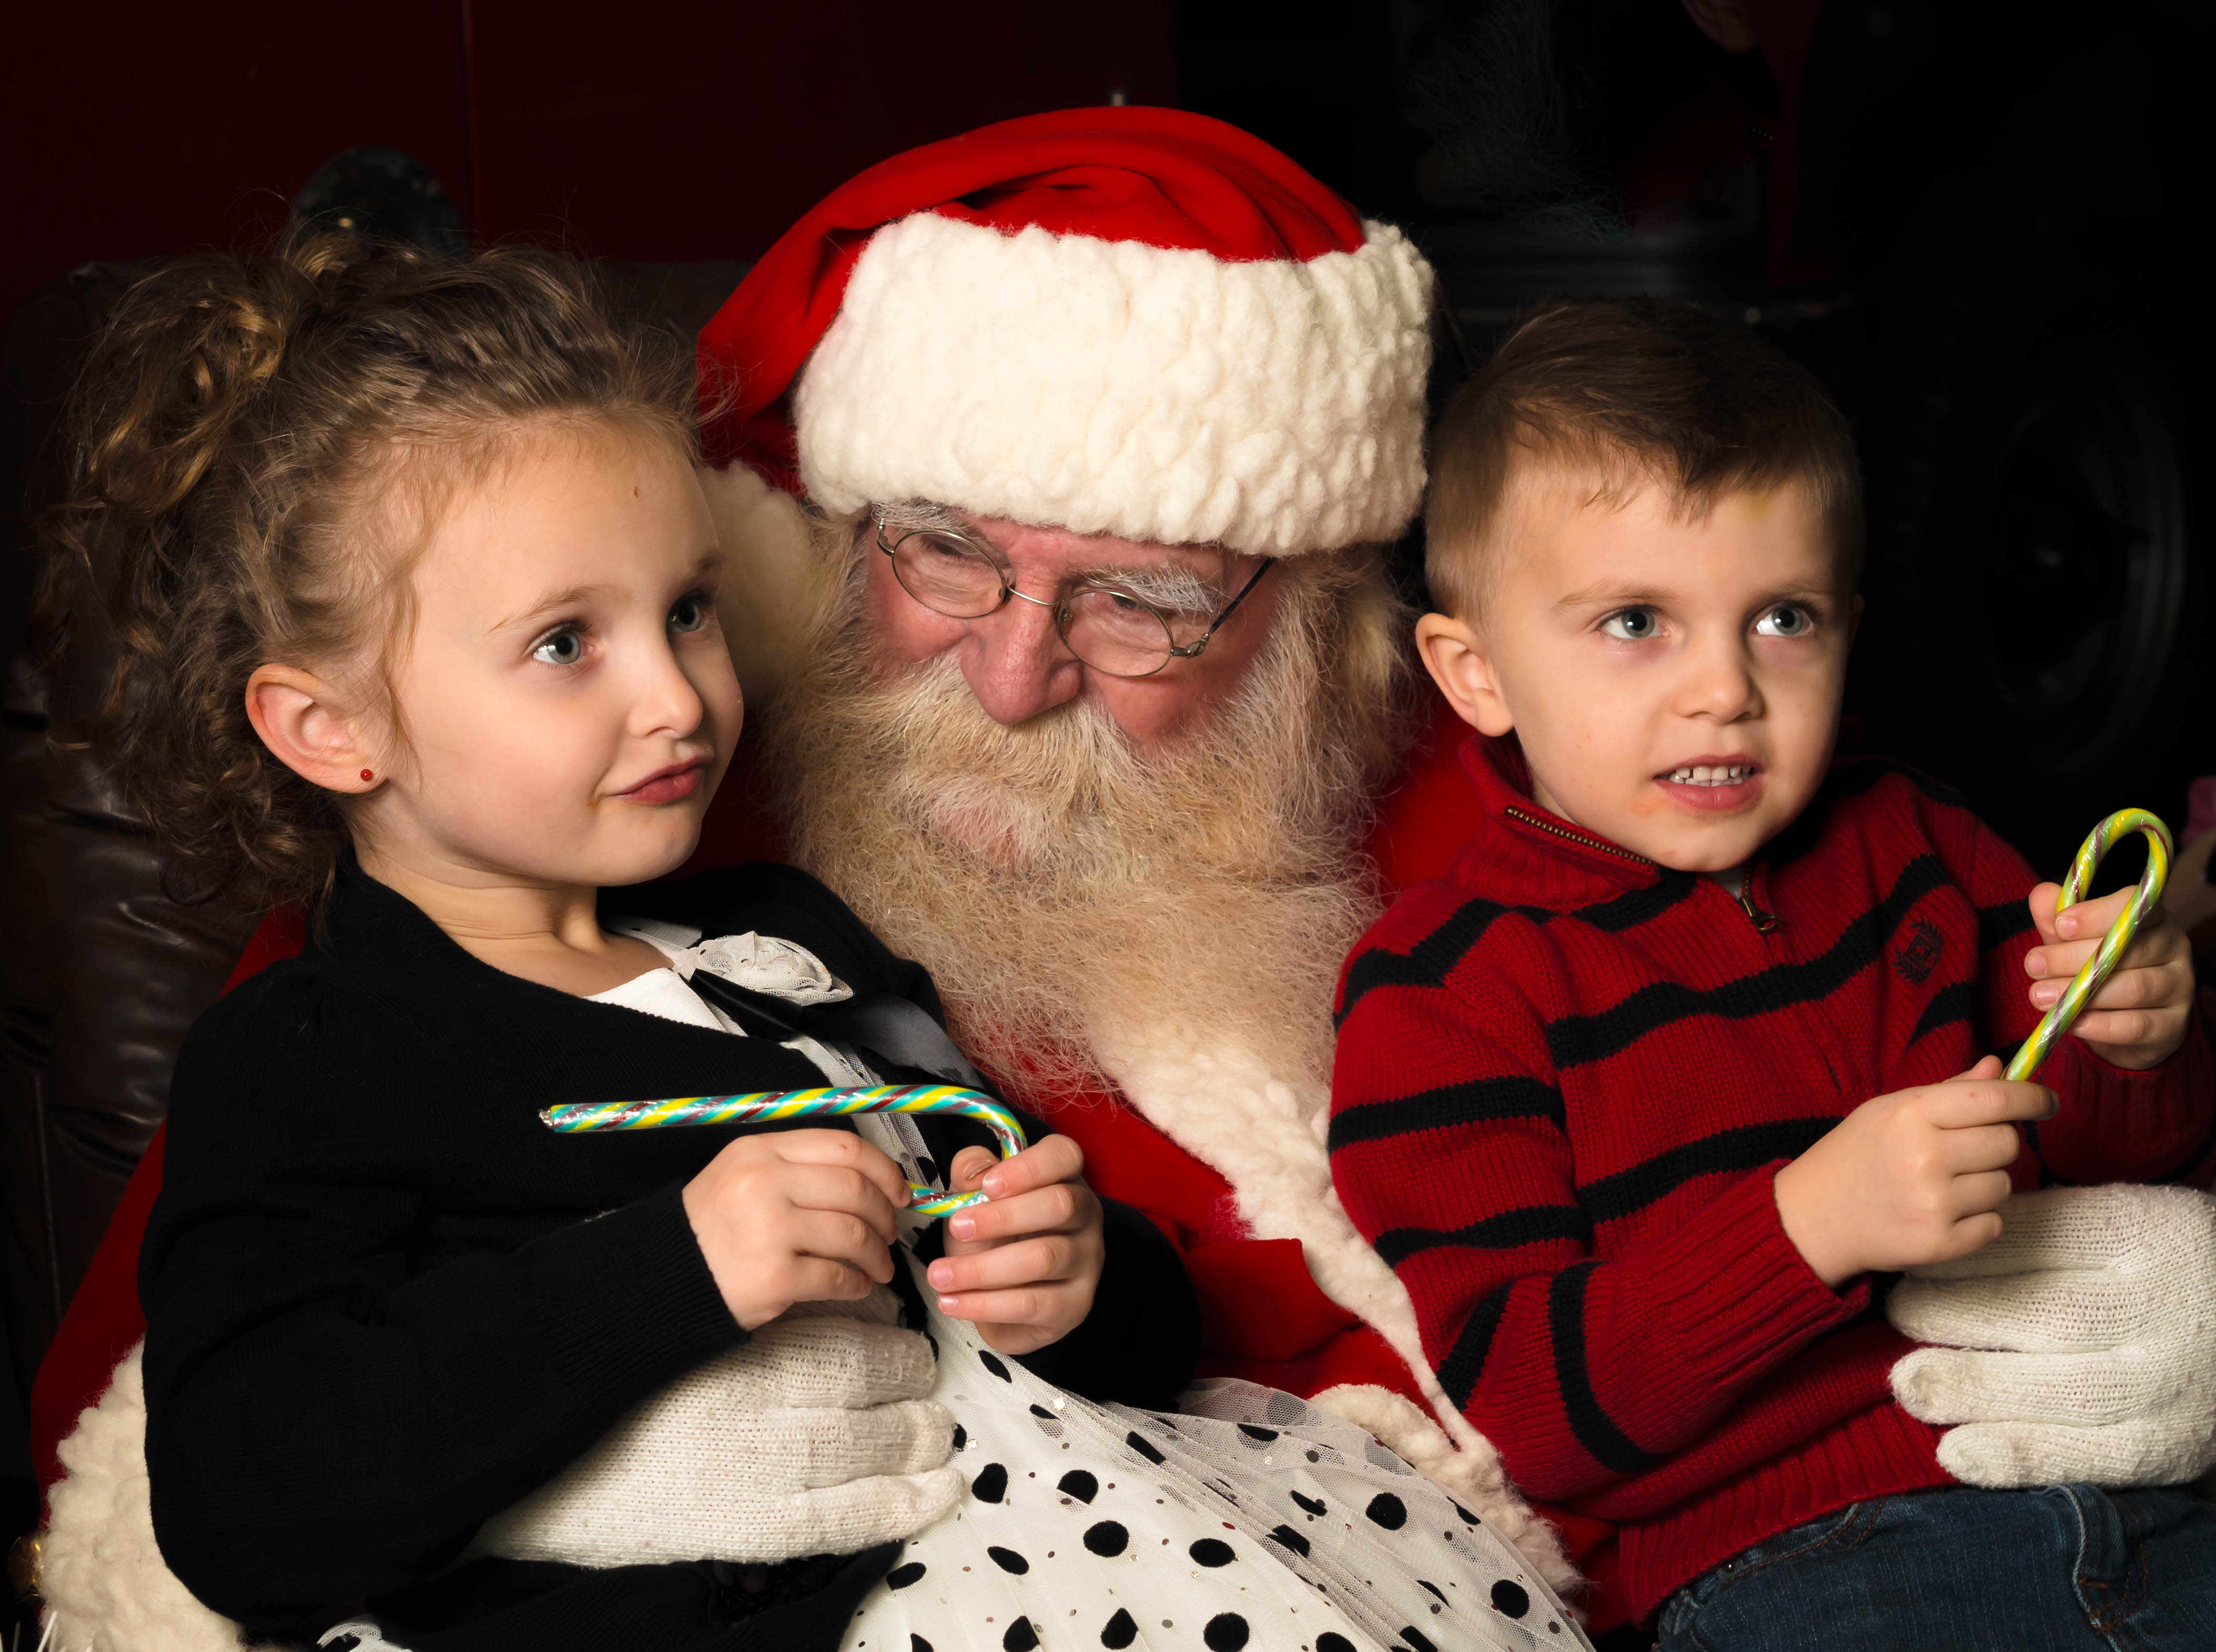 Terminally ill east Tennessee boy, 5, dies in Santa’s arms